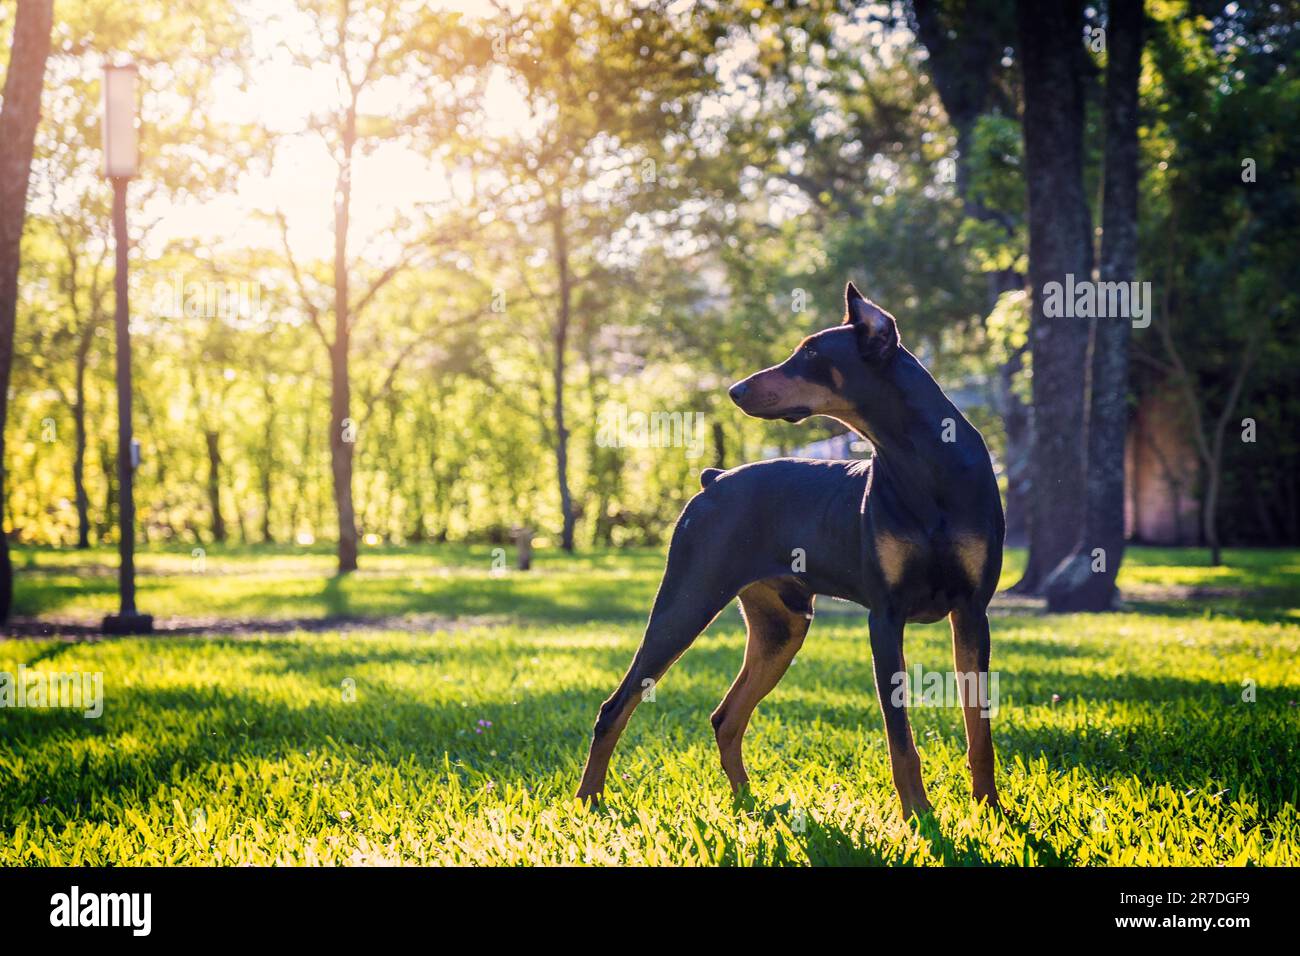 A Dobermann dog stands in a lush green grassy field against a backdrop of tall trees Stock Photo